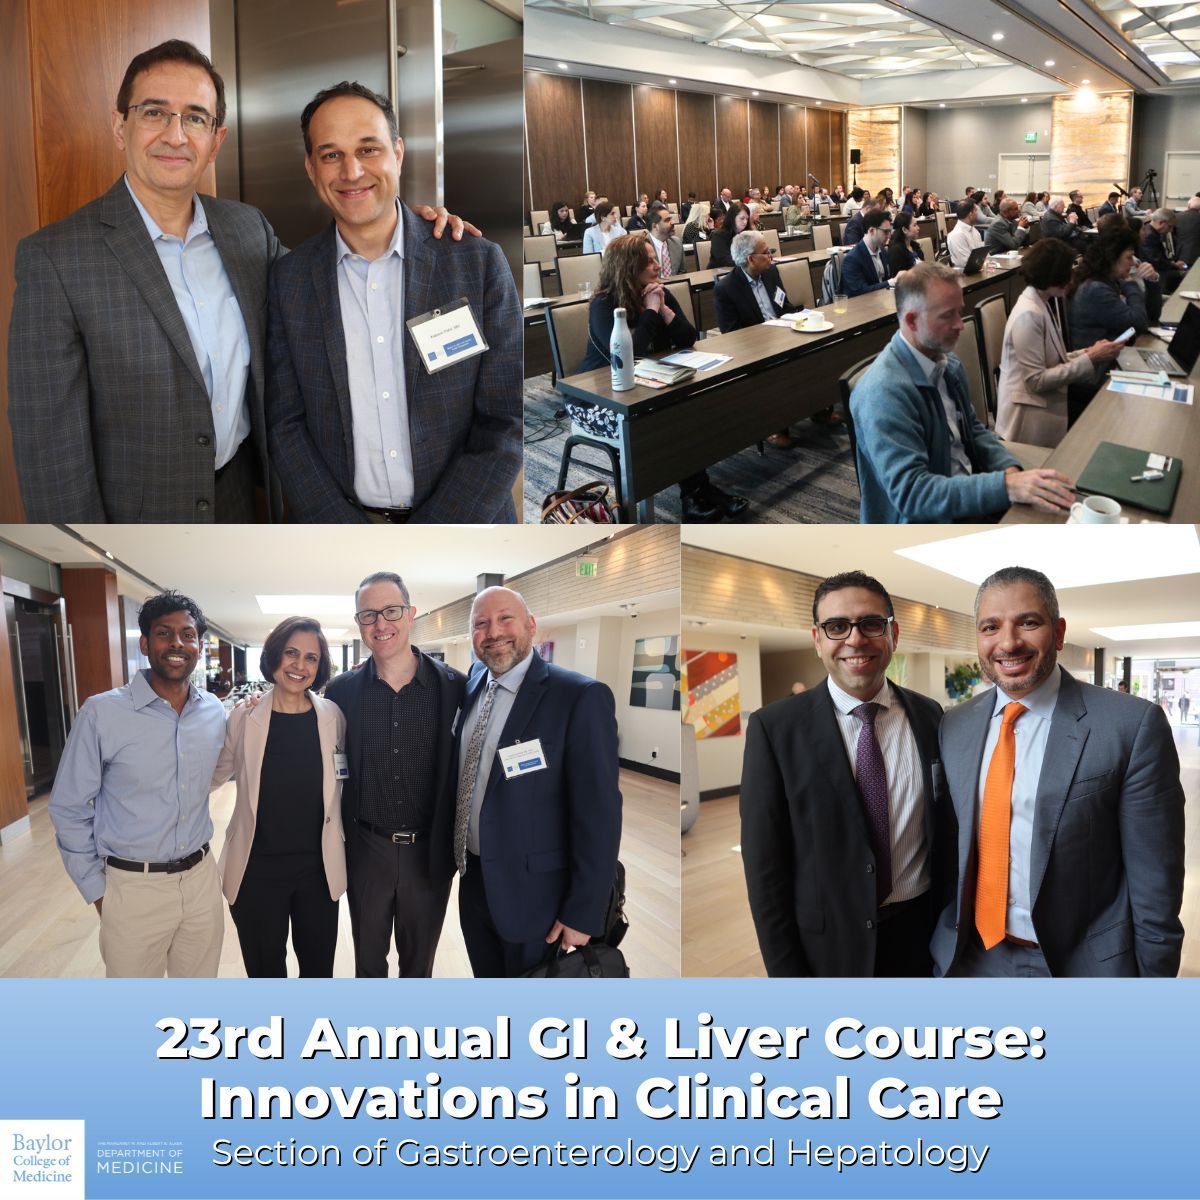 Over 150 people attended the Section of Gastroenterology and Hepatology's recently-hosted 23rd Annual GI & Liver Course: Innovations in Clinical Care. All outstanding talks were received well by attendees, and we are already looking forward to next year!